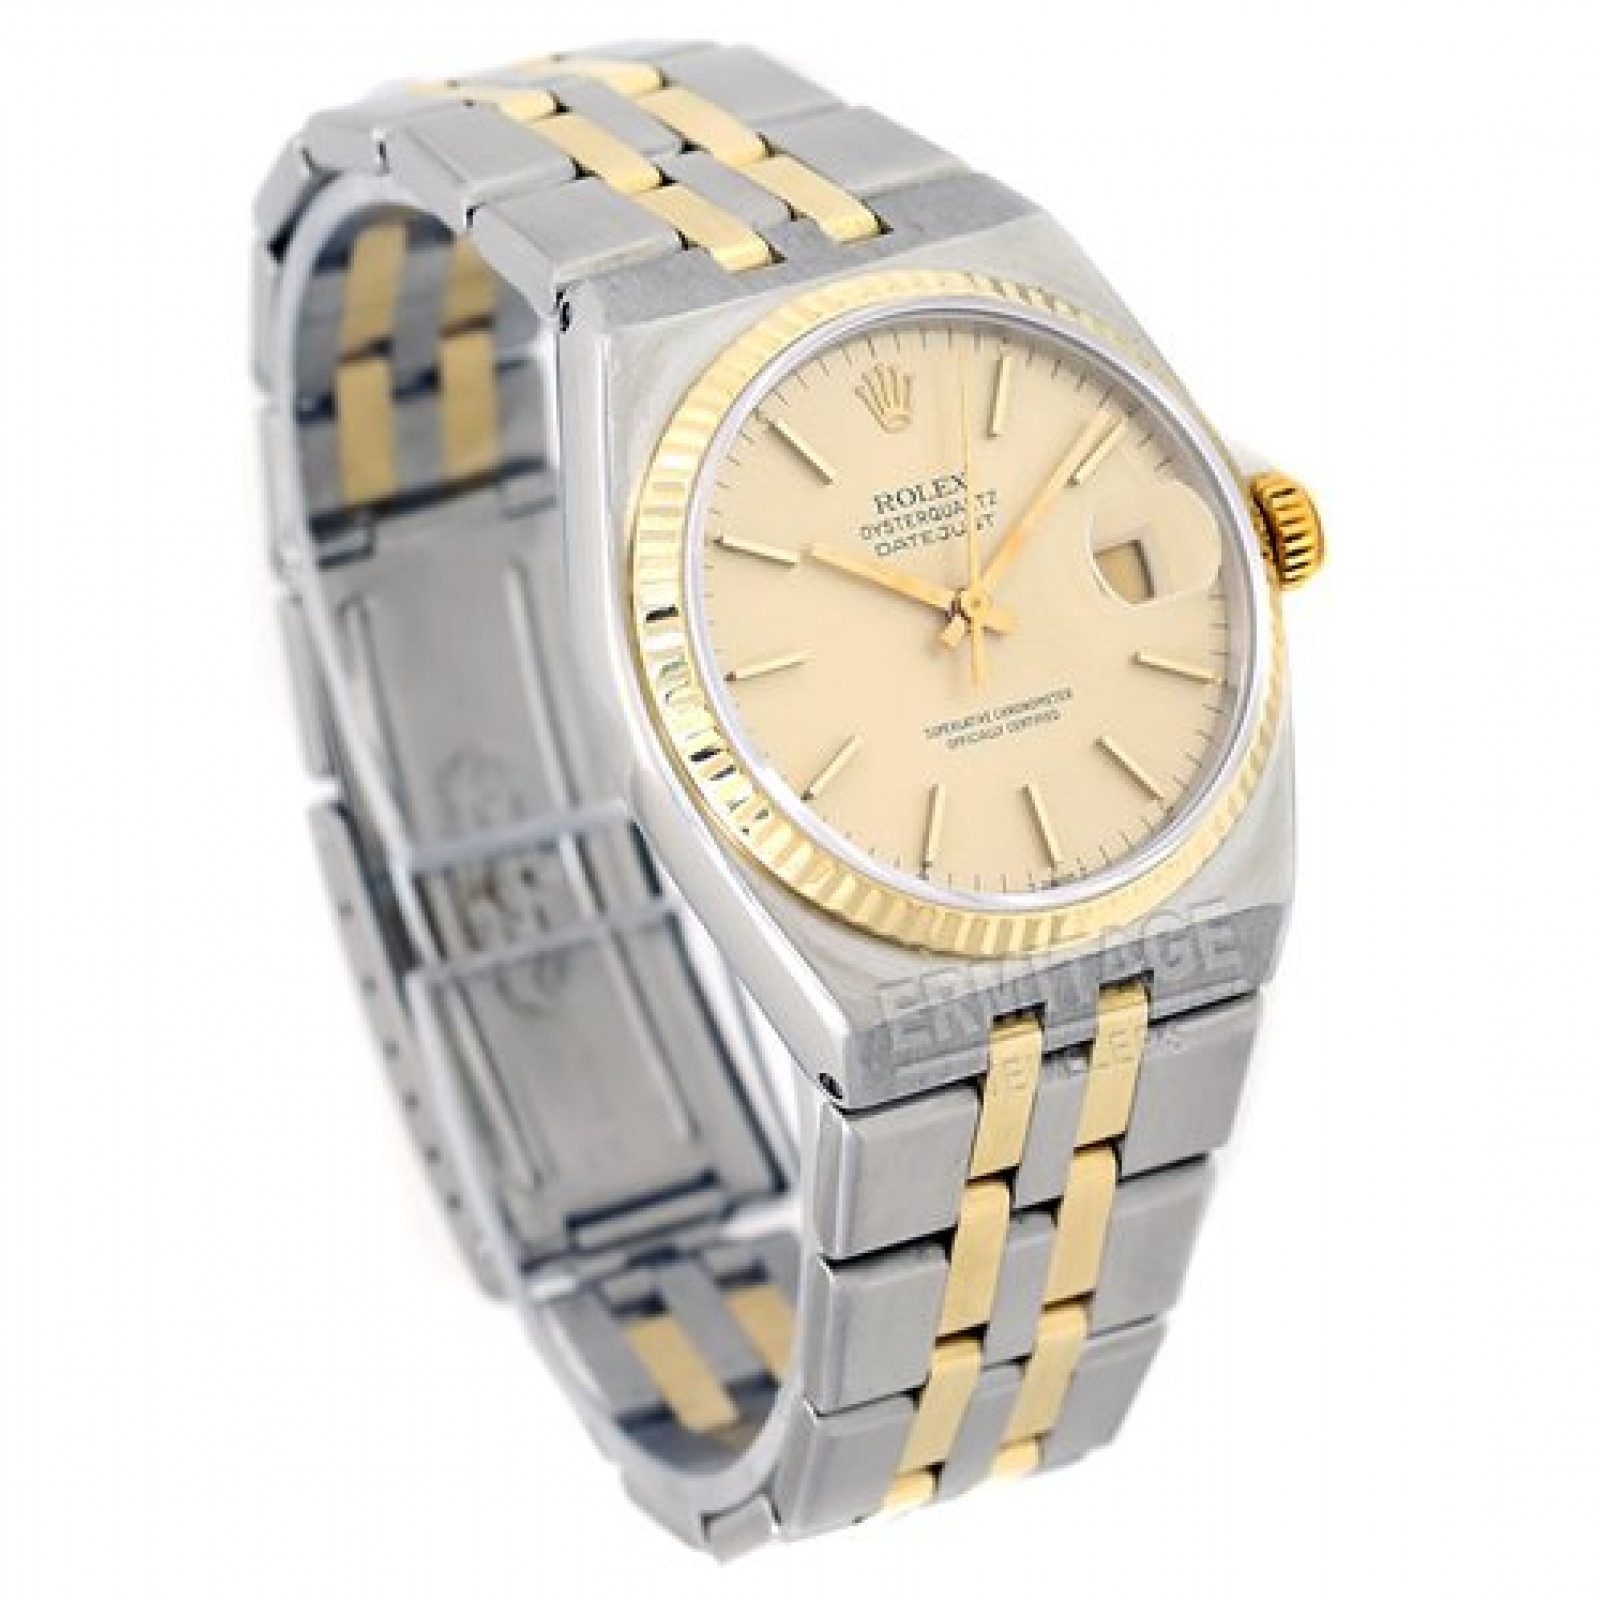 Pre-Owned Rolex Oysterquartz 17013 Gold & Steel